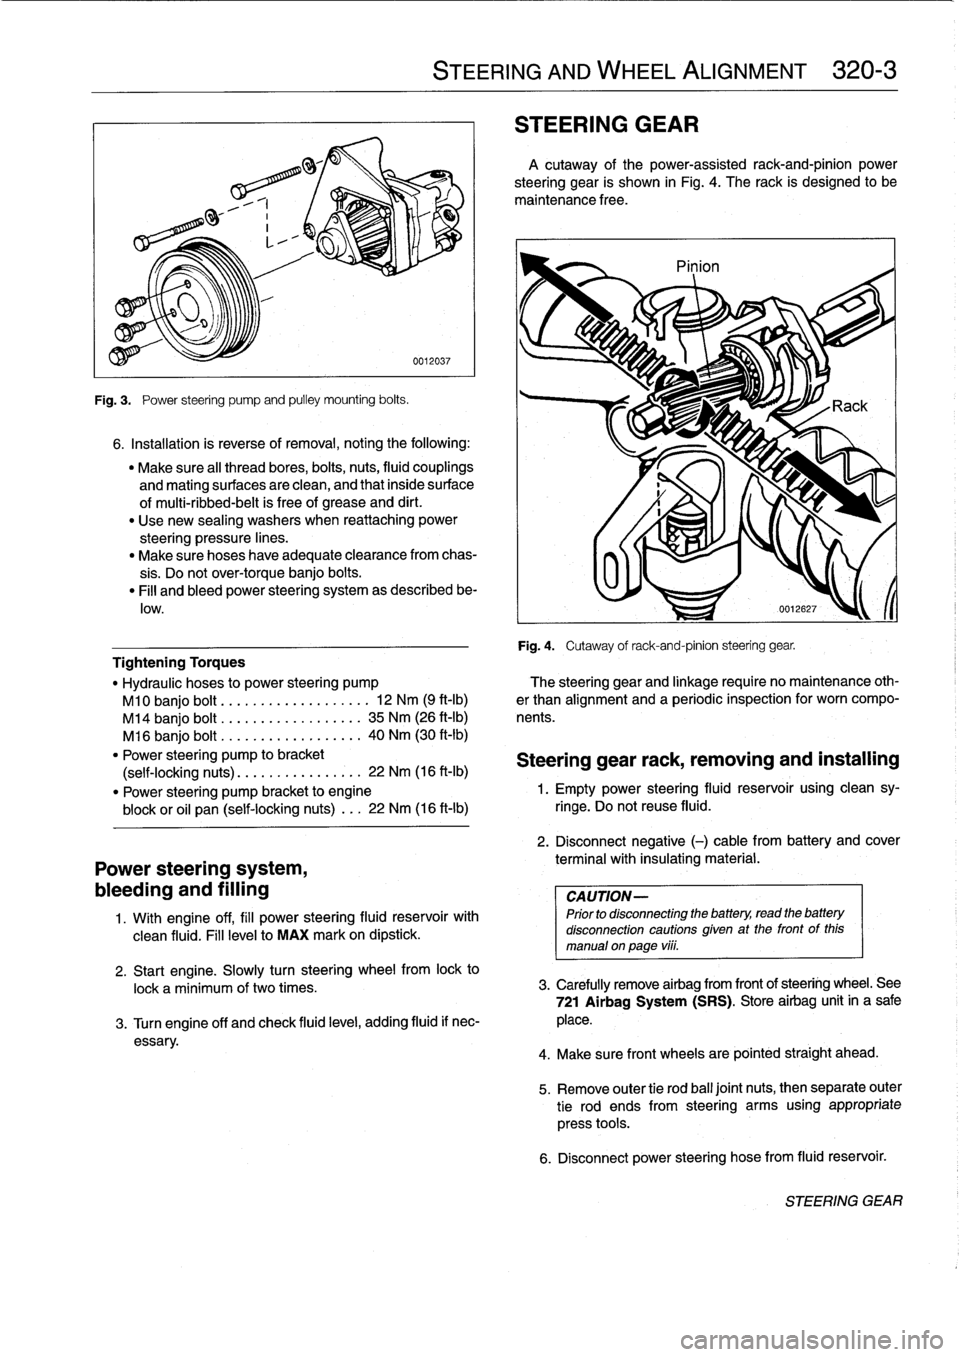 BMW 318i 1996 E36 Workshop Manual 
Fig
.
3
.

	

Power
steering
pump
and
pulley
mounting
bolts
.

6
.
Installation
is
reverse
of
removal,
noting
the
following
:

"
Make
sure
al¡
thread
bores,
bolts,
nuts,
fluid
couplings

and
mating
